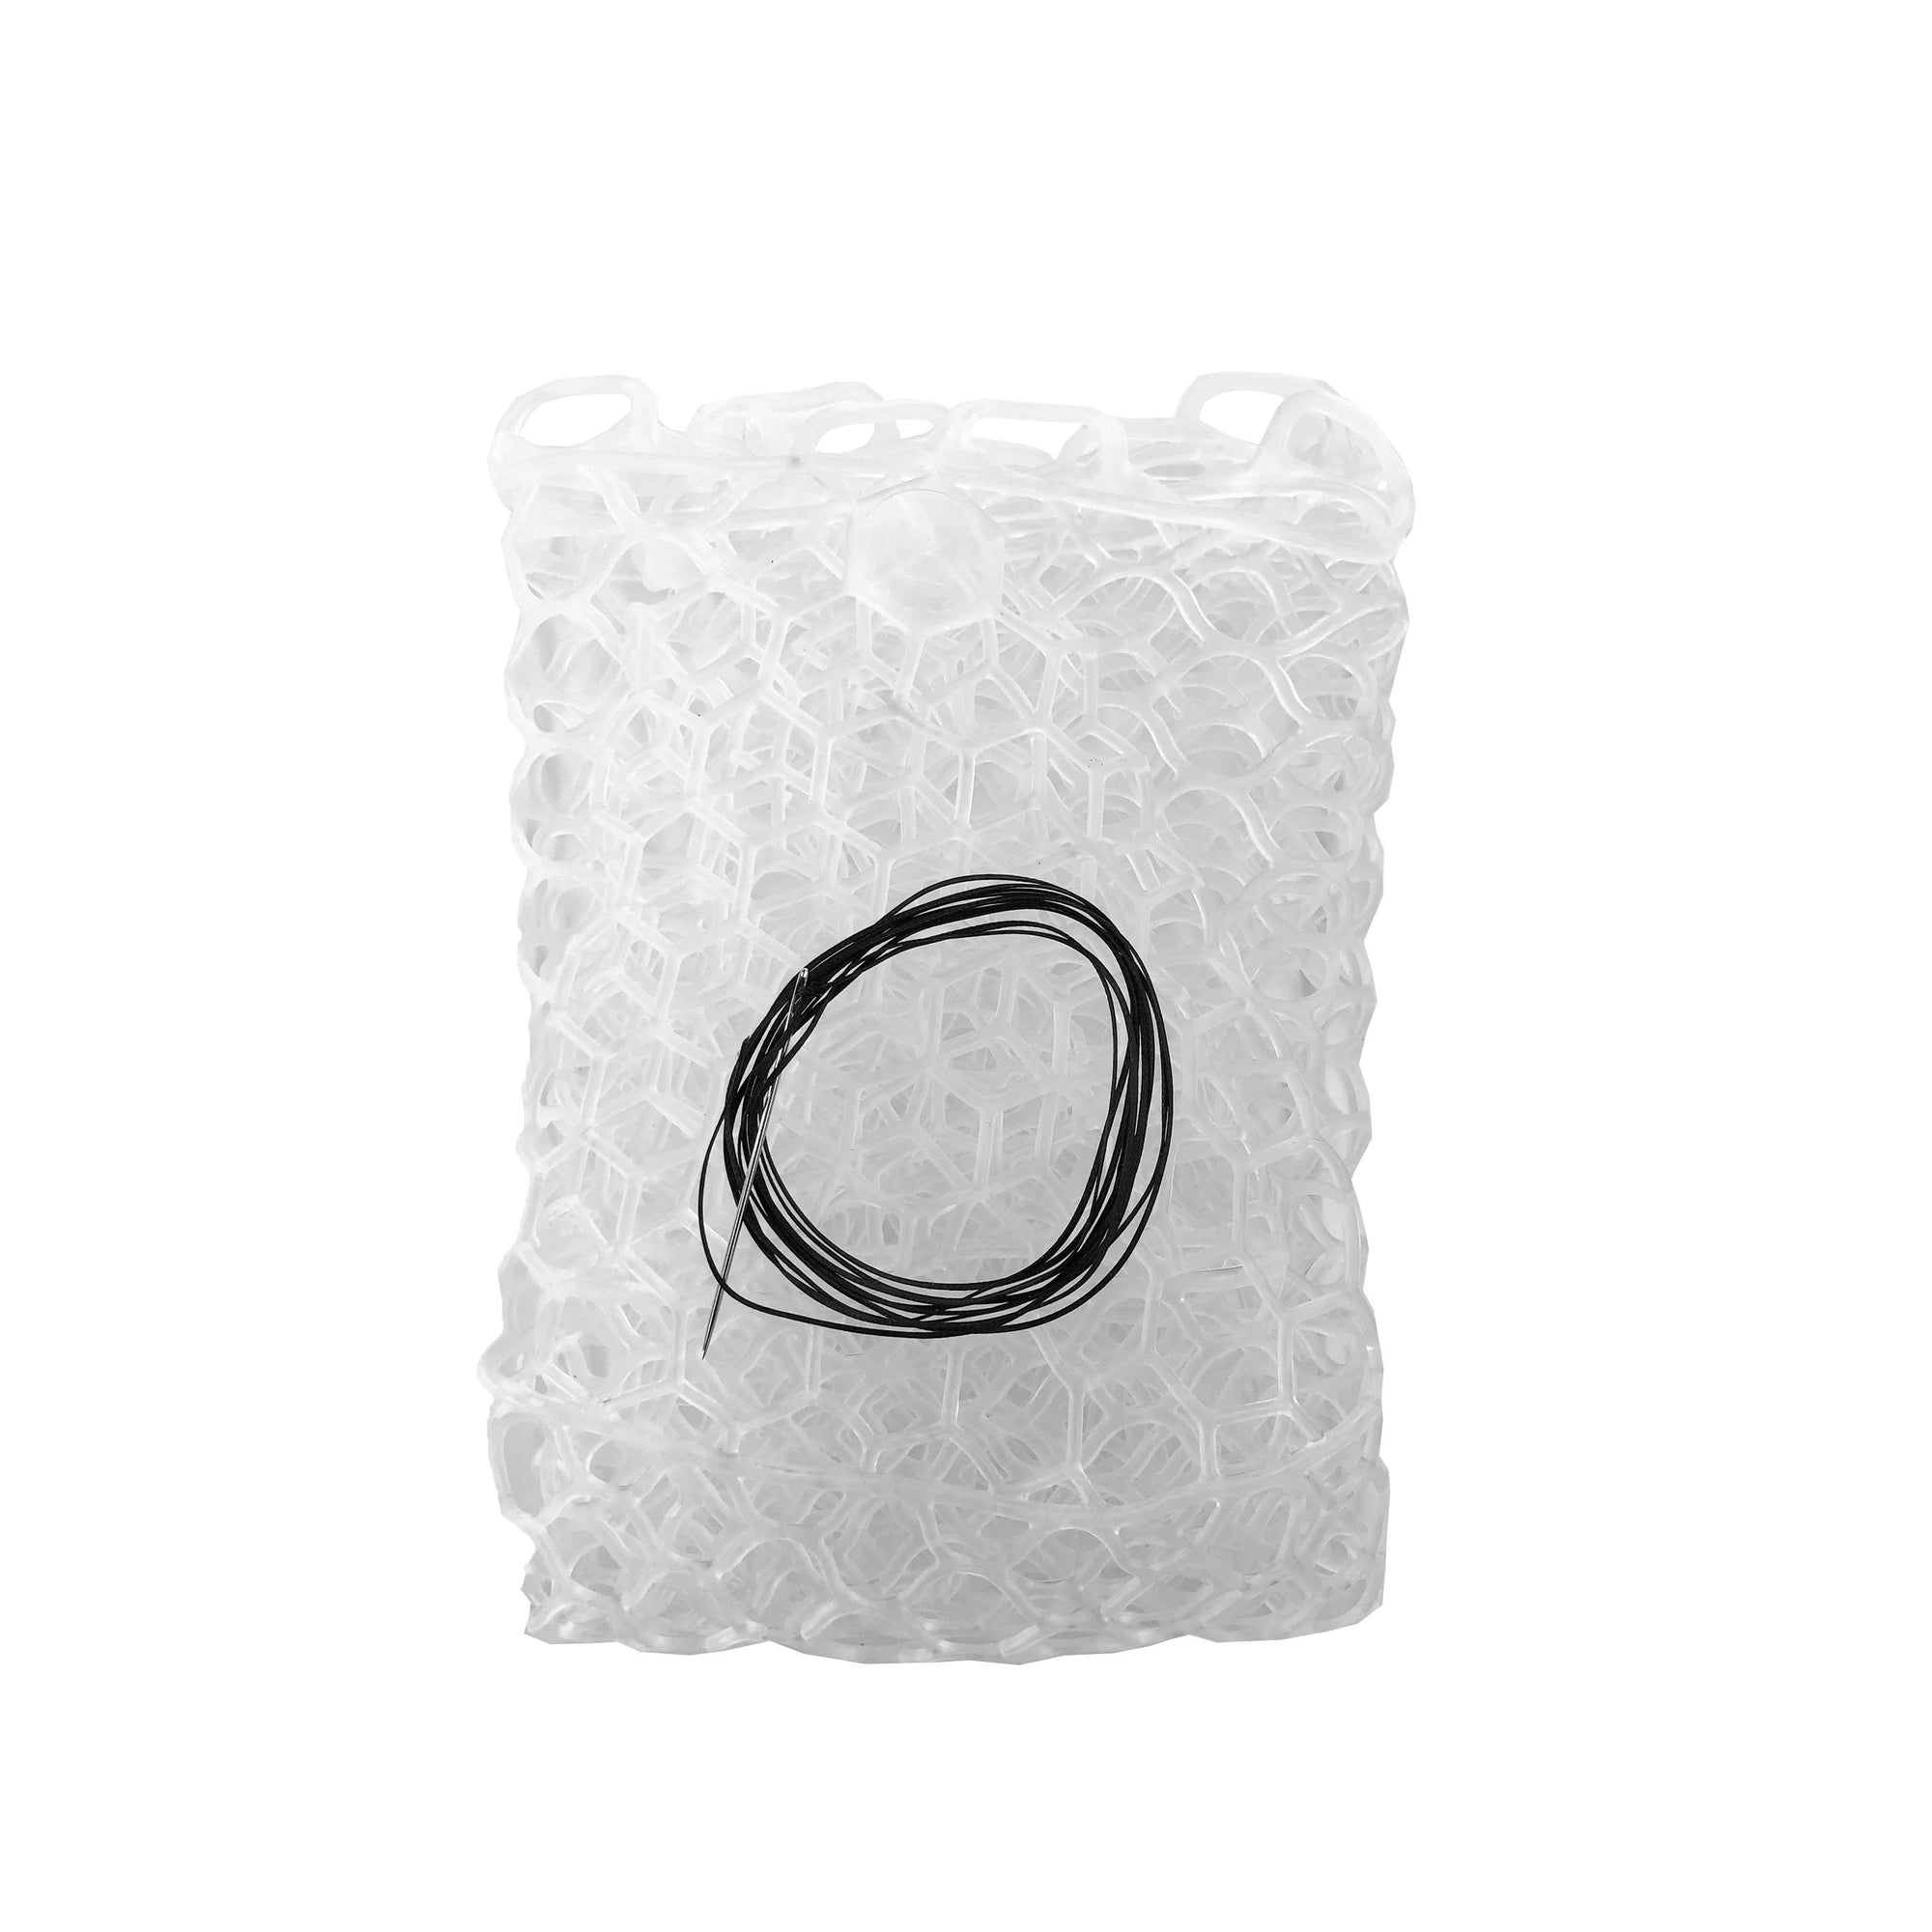 Fishpond Nomad Replacement Rubber Net 15"